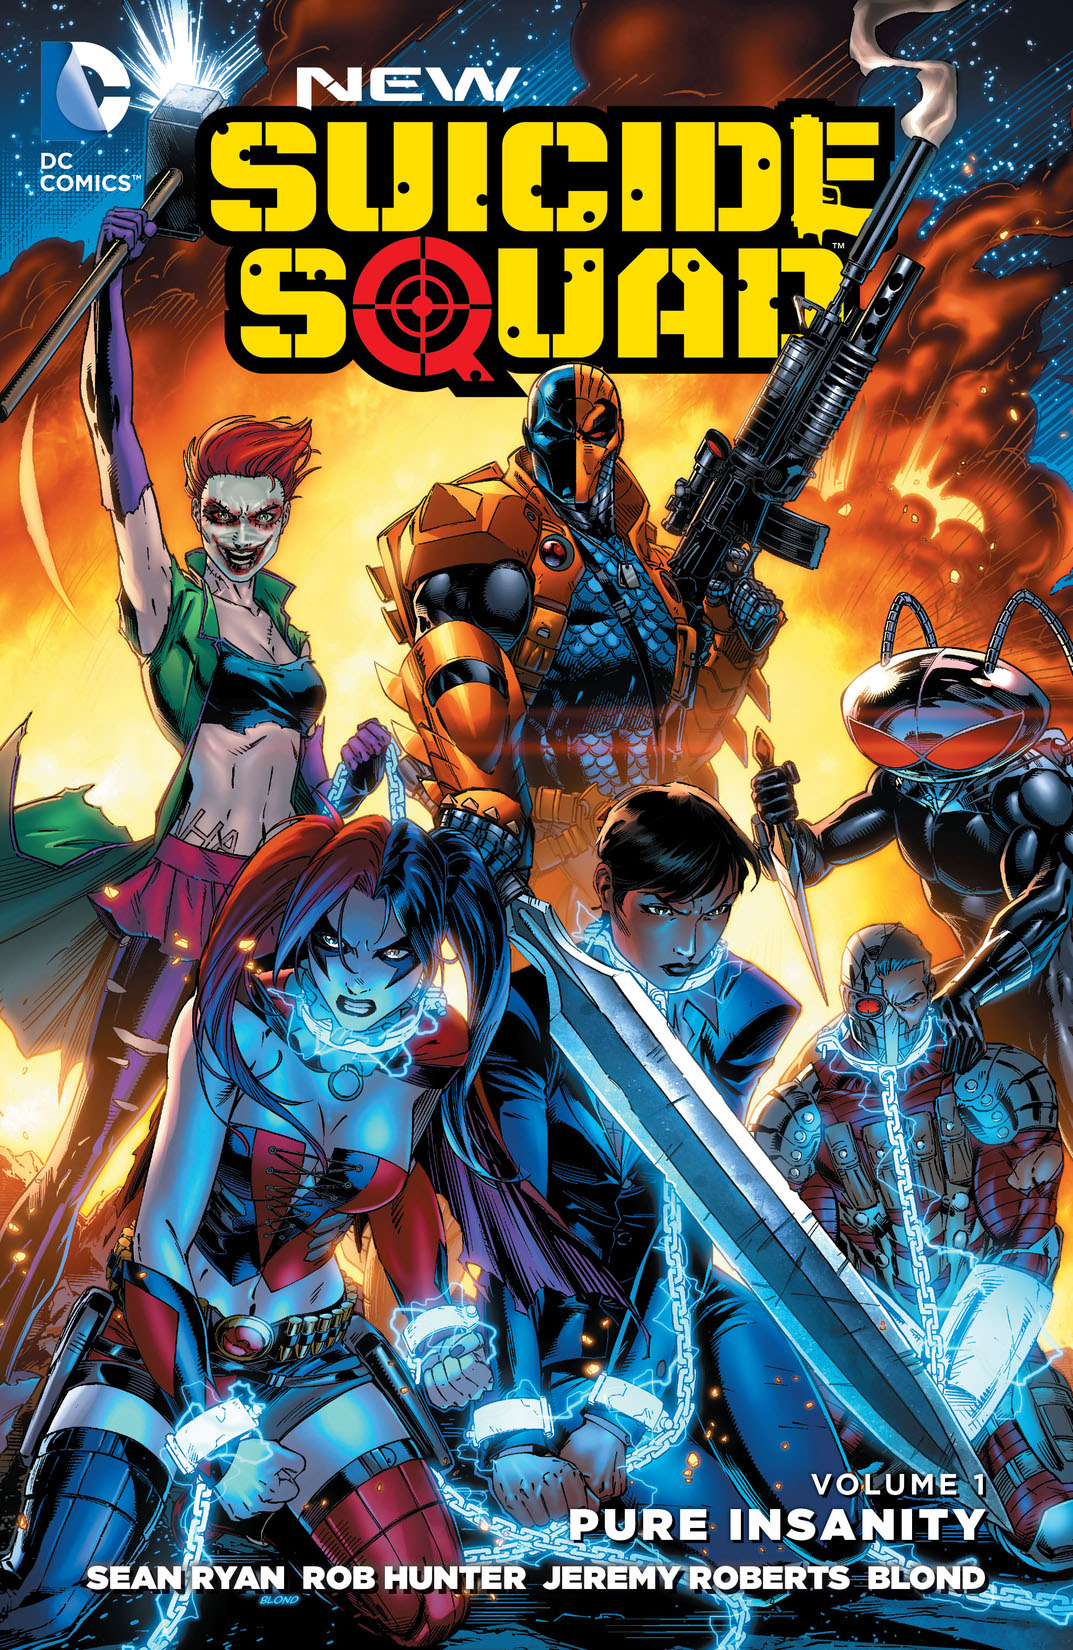 New Suicide Squad Vol. 1: Pure Insanity preview images